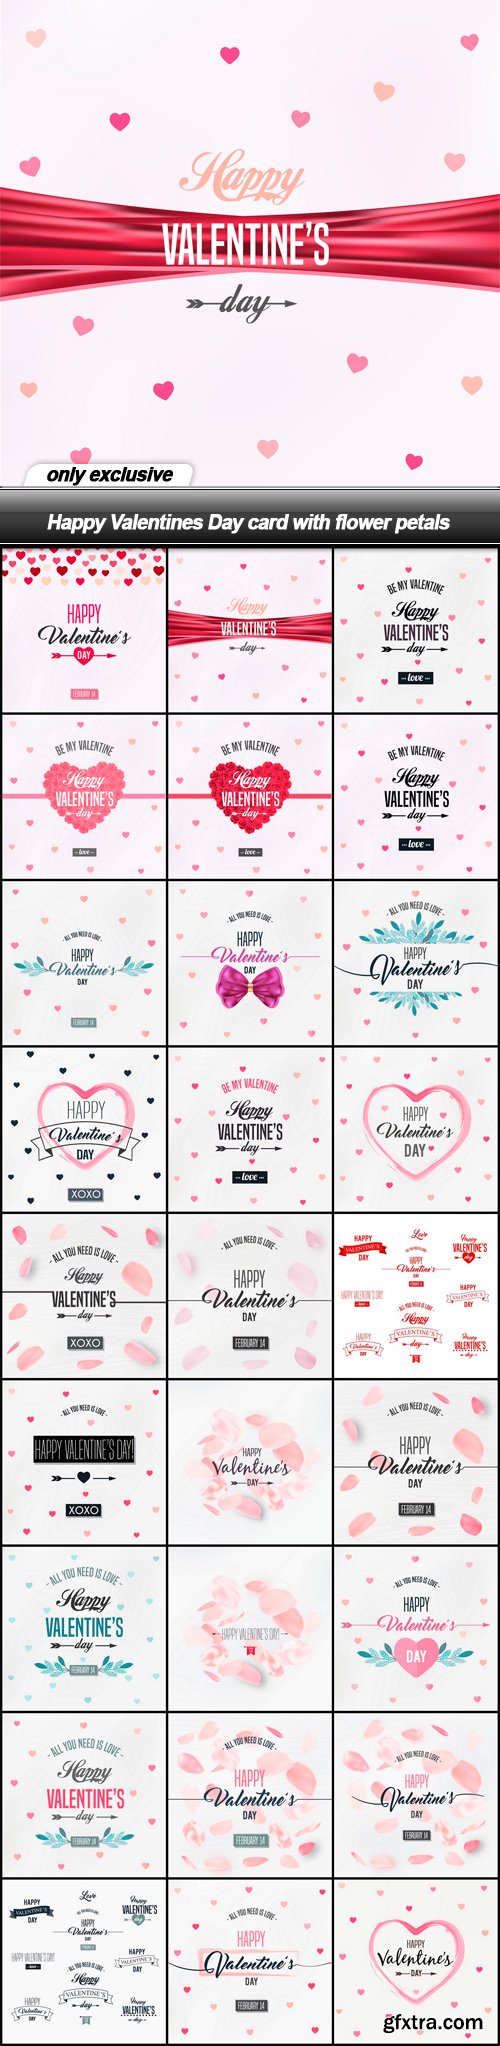 Happy Valentines Day card with flower petals - 27 EPS